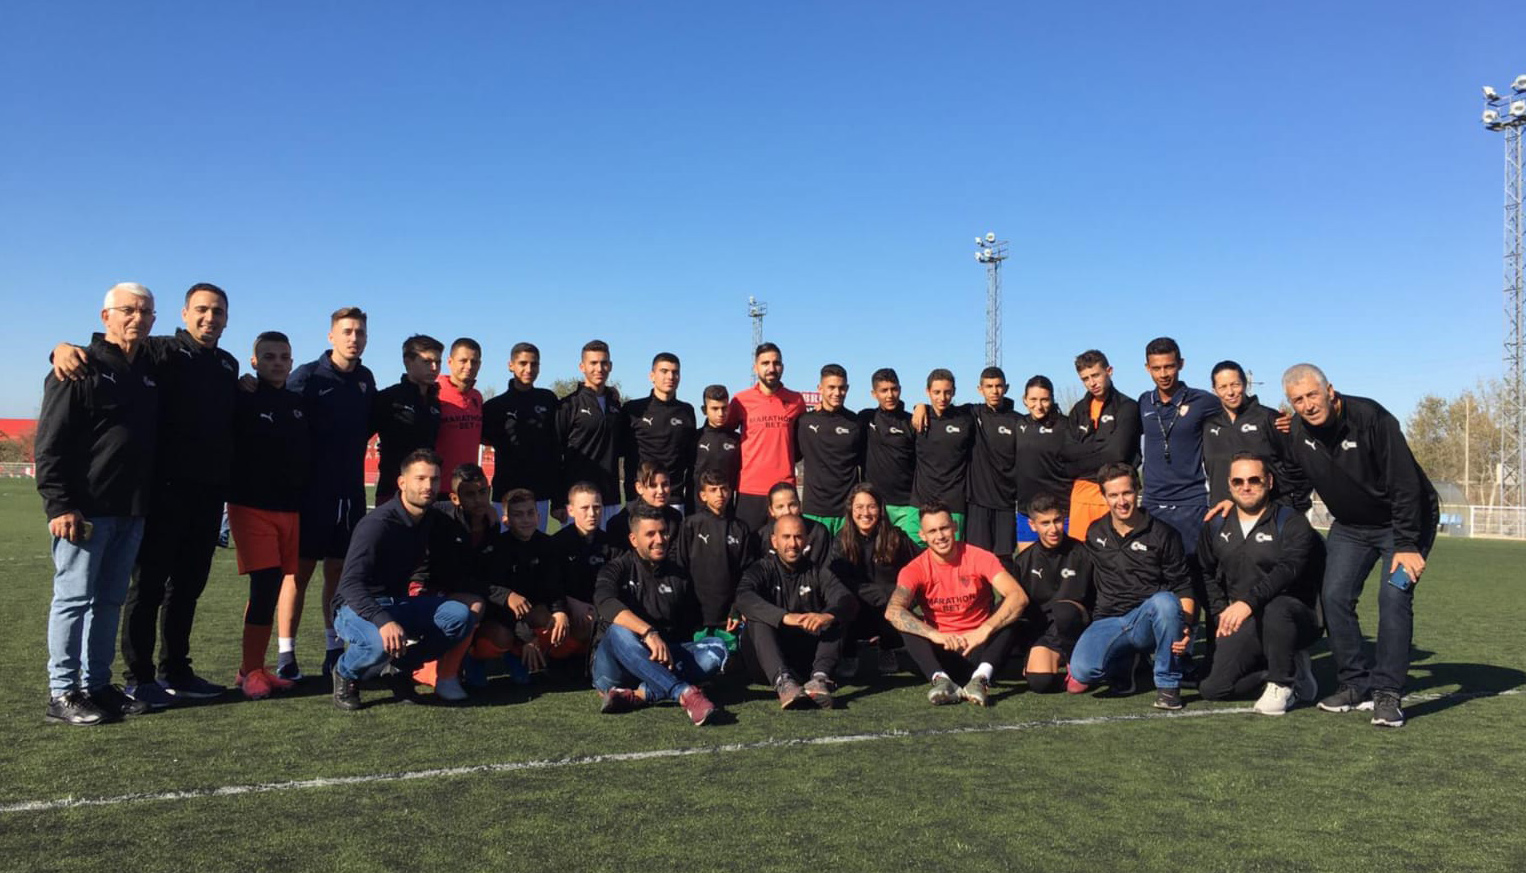 The Israeli footballers took part in a training session at the training ground